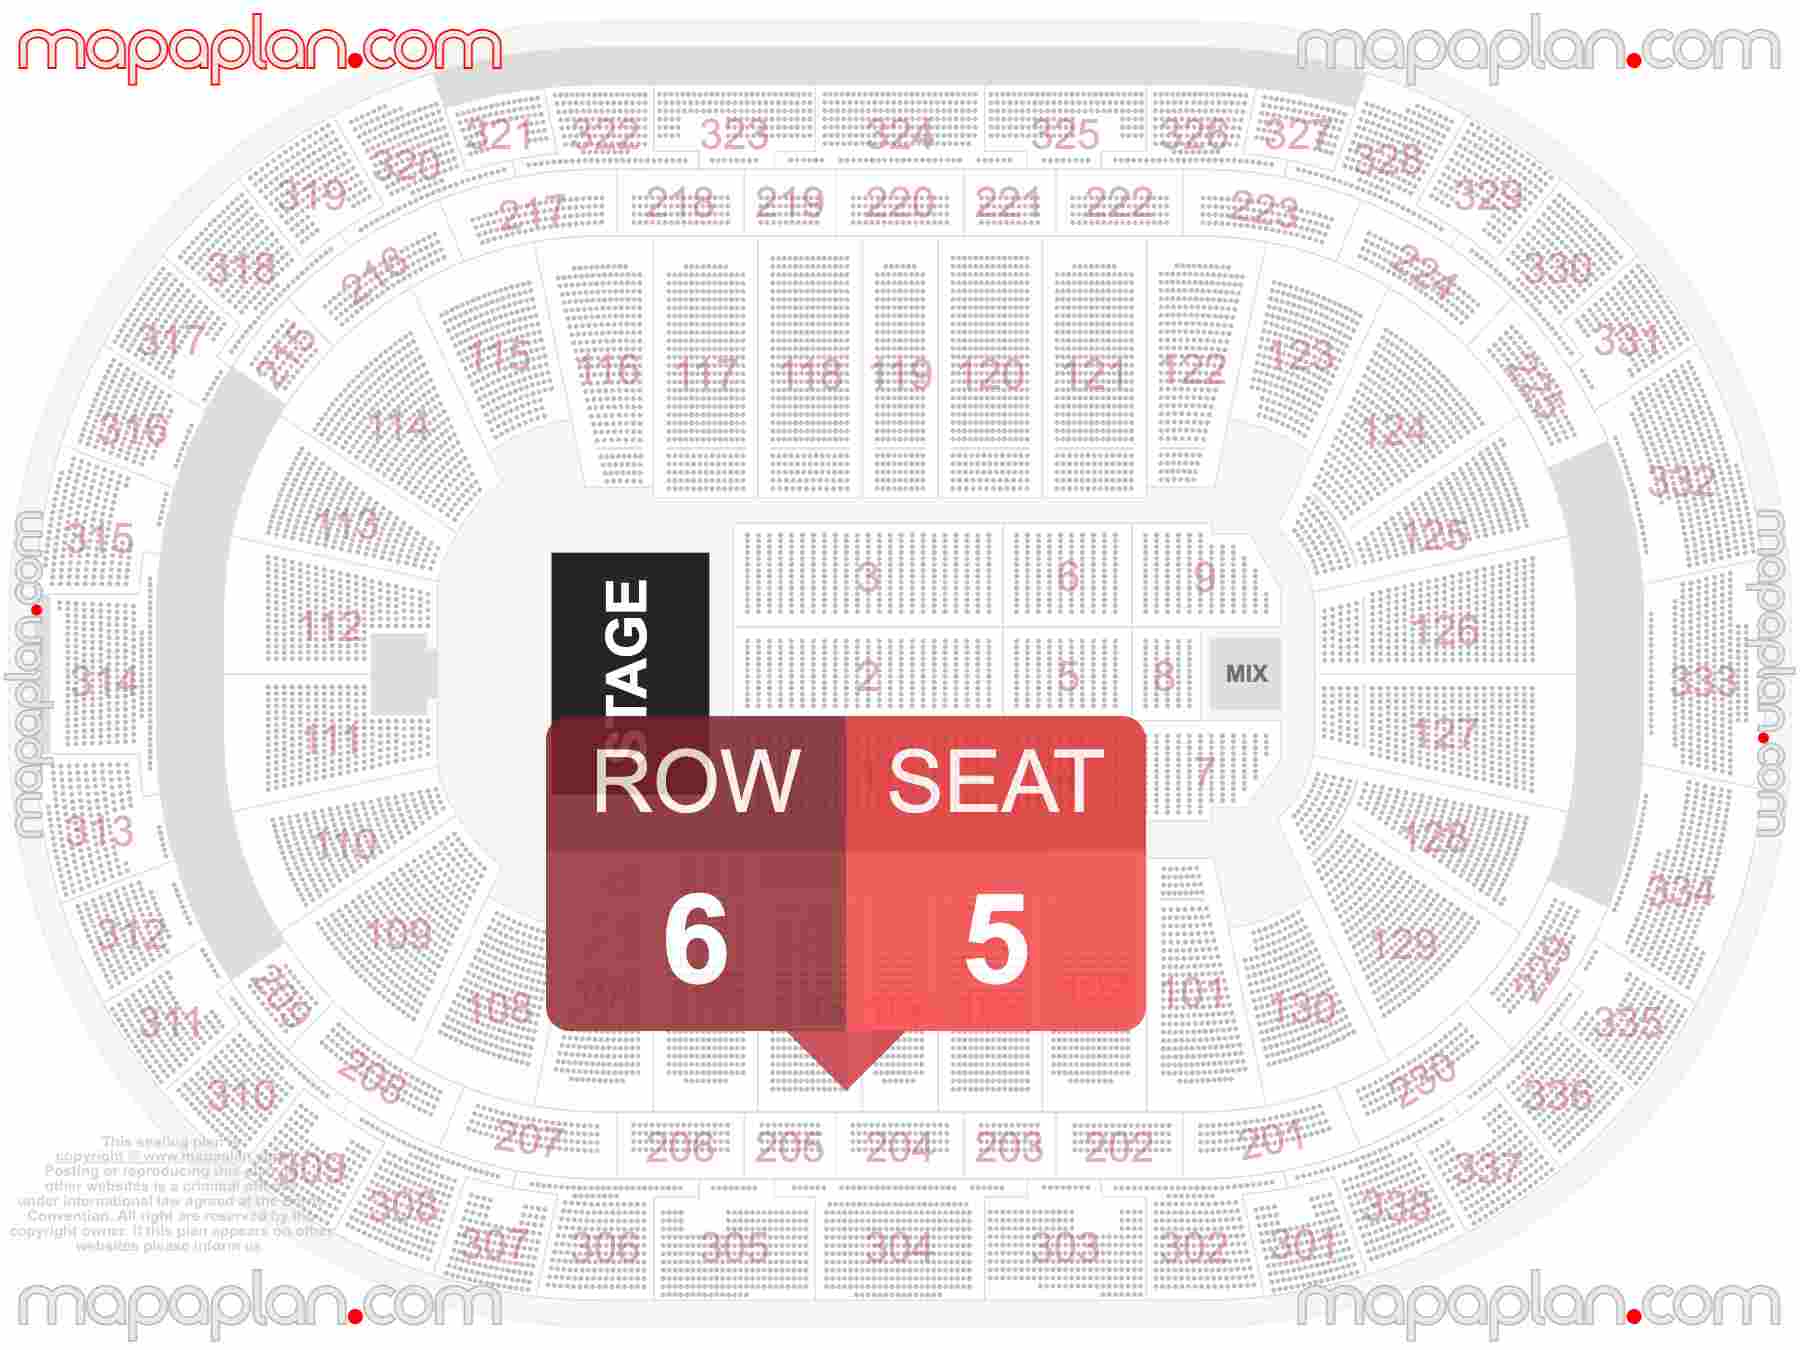 Raleigh PNC Arena seating chart Concert detailed seat numbers and row numbering chart with interactive map plan layout